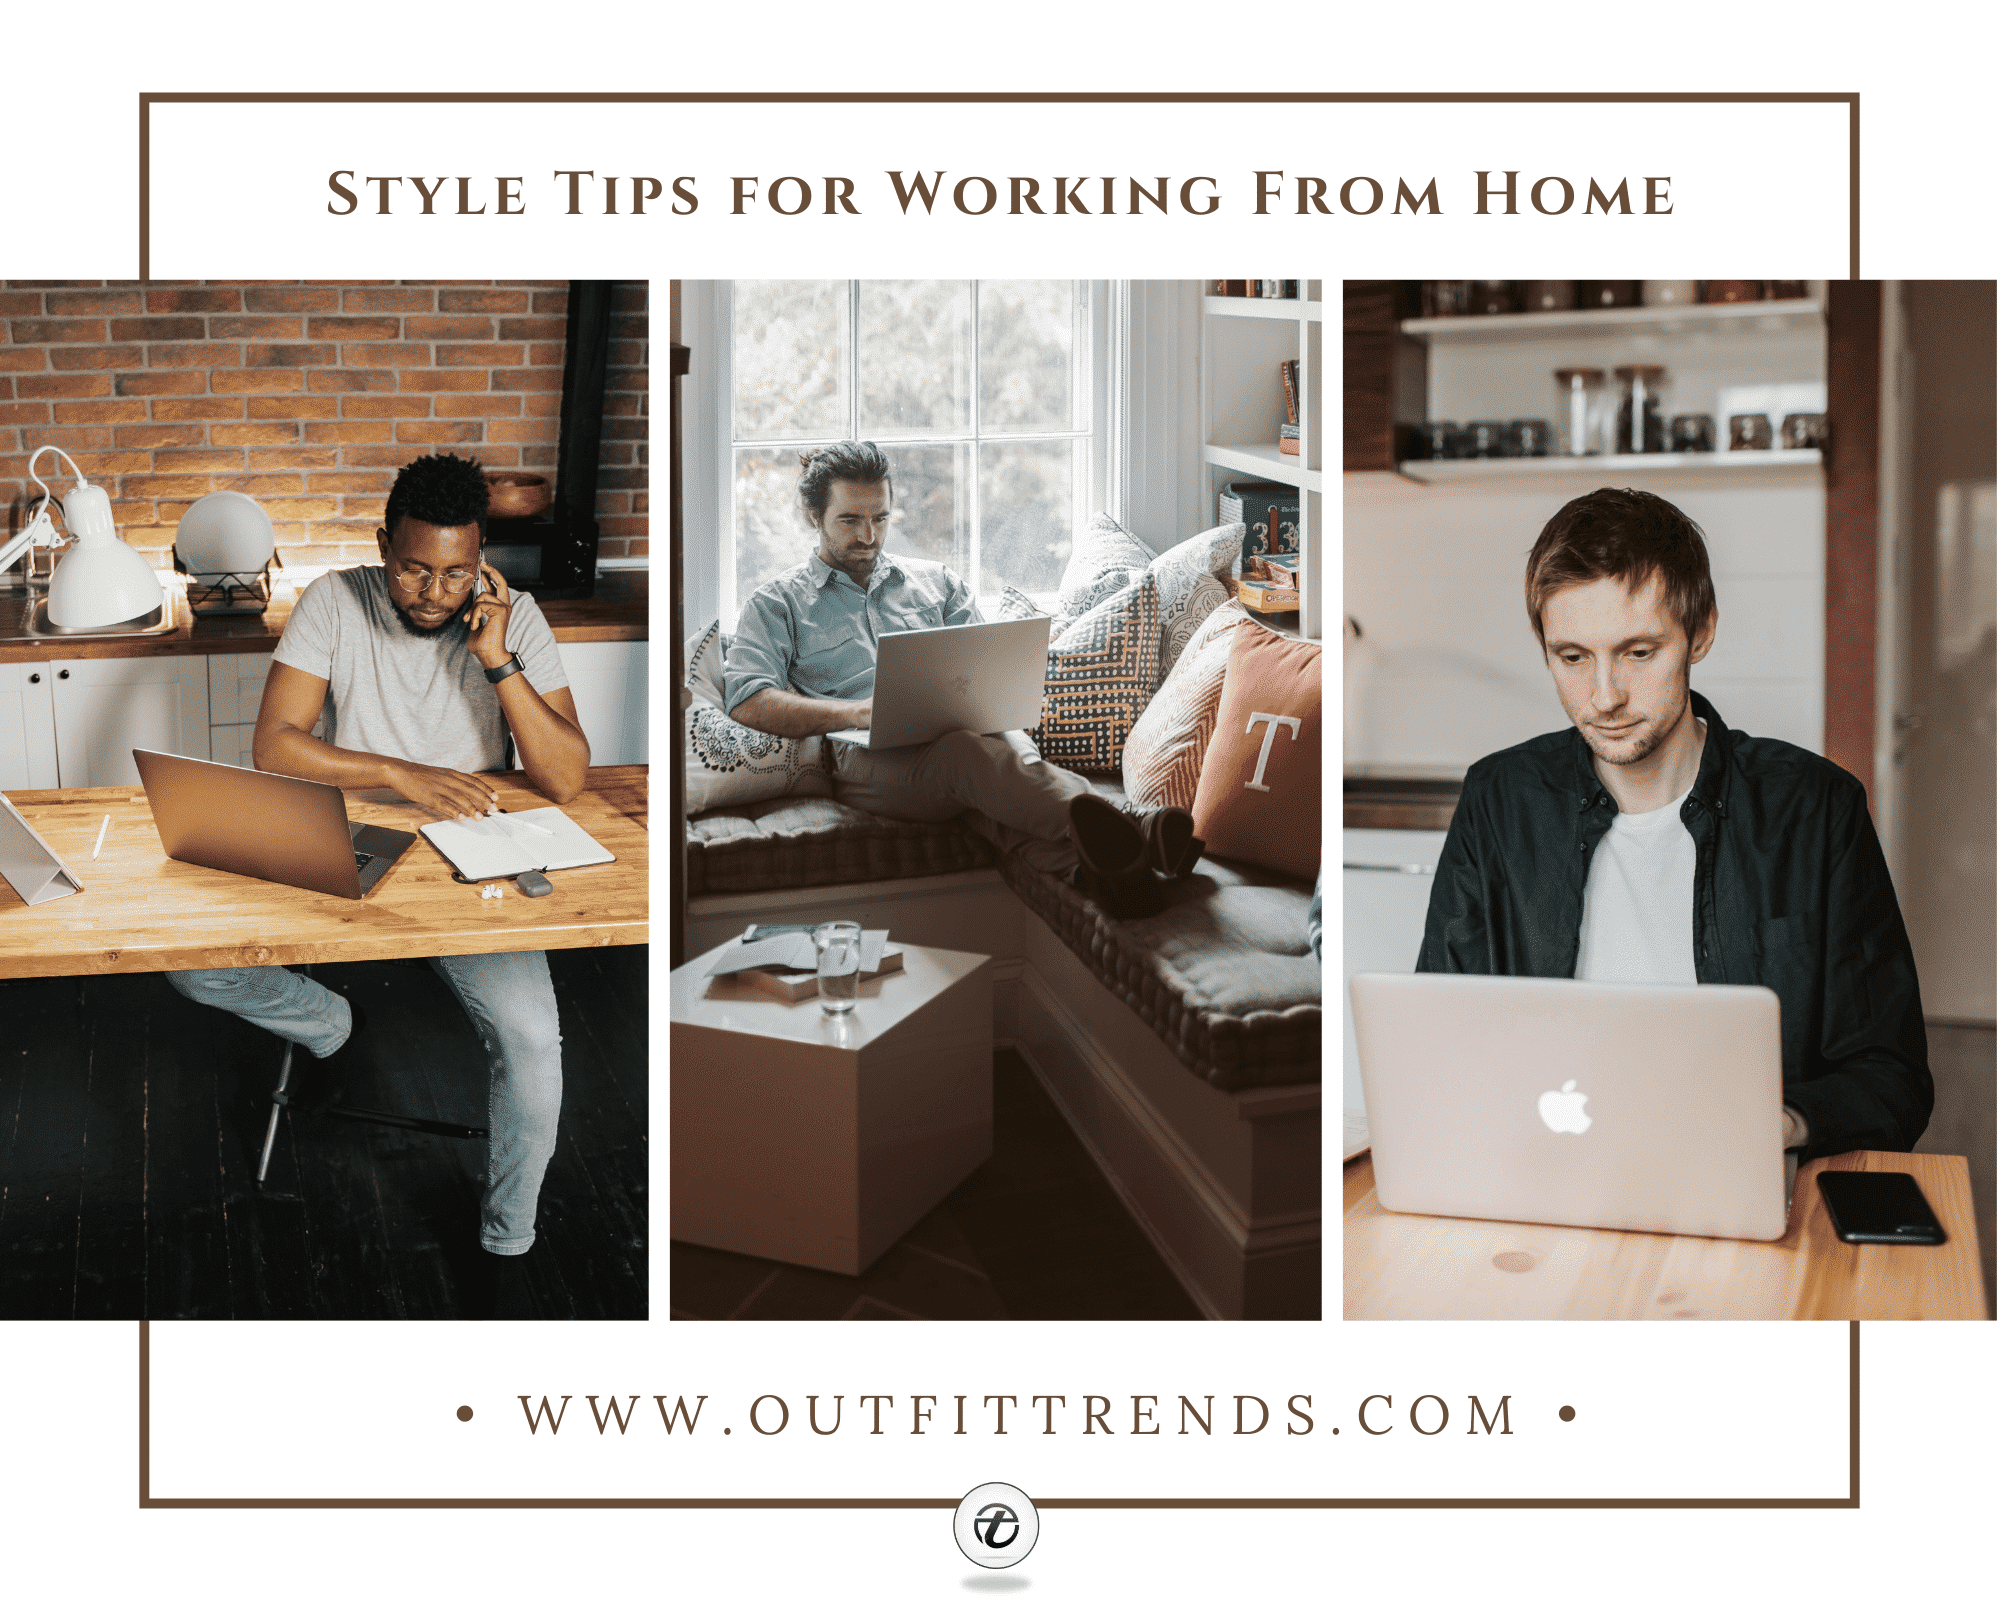 Men’s WFH Style Guide| 35 Best Casual Work From Home Outfits